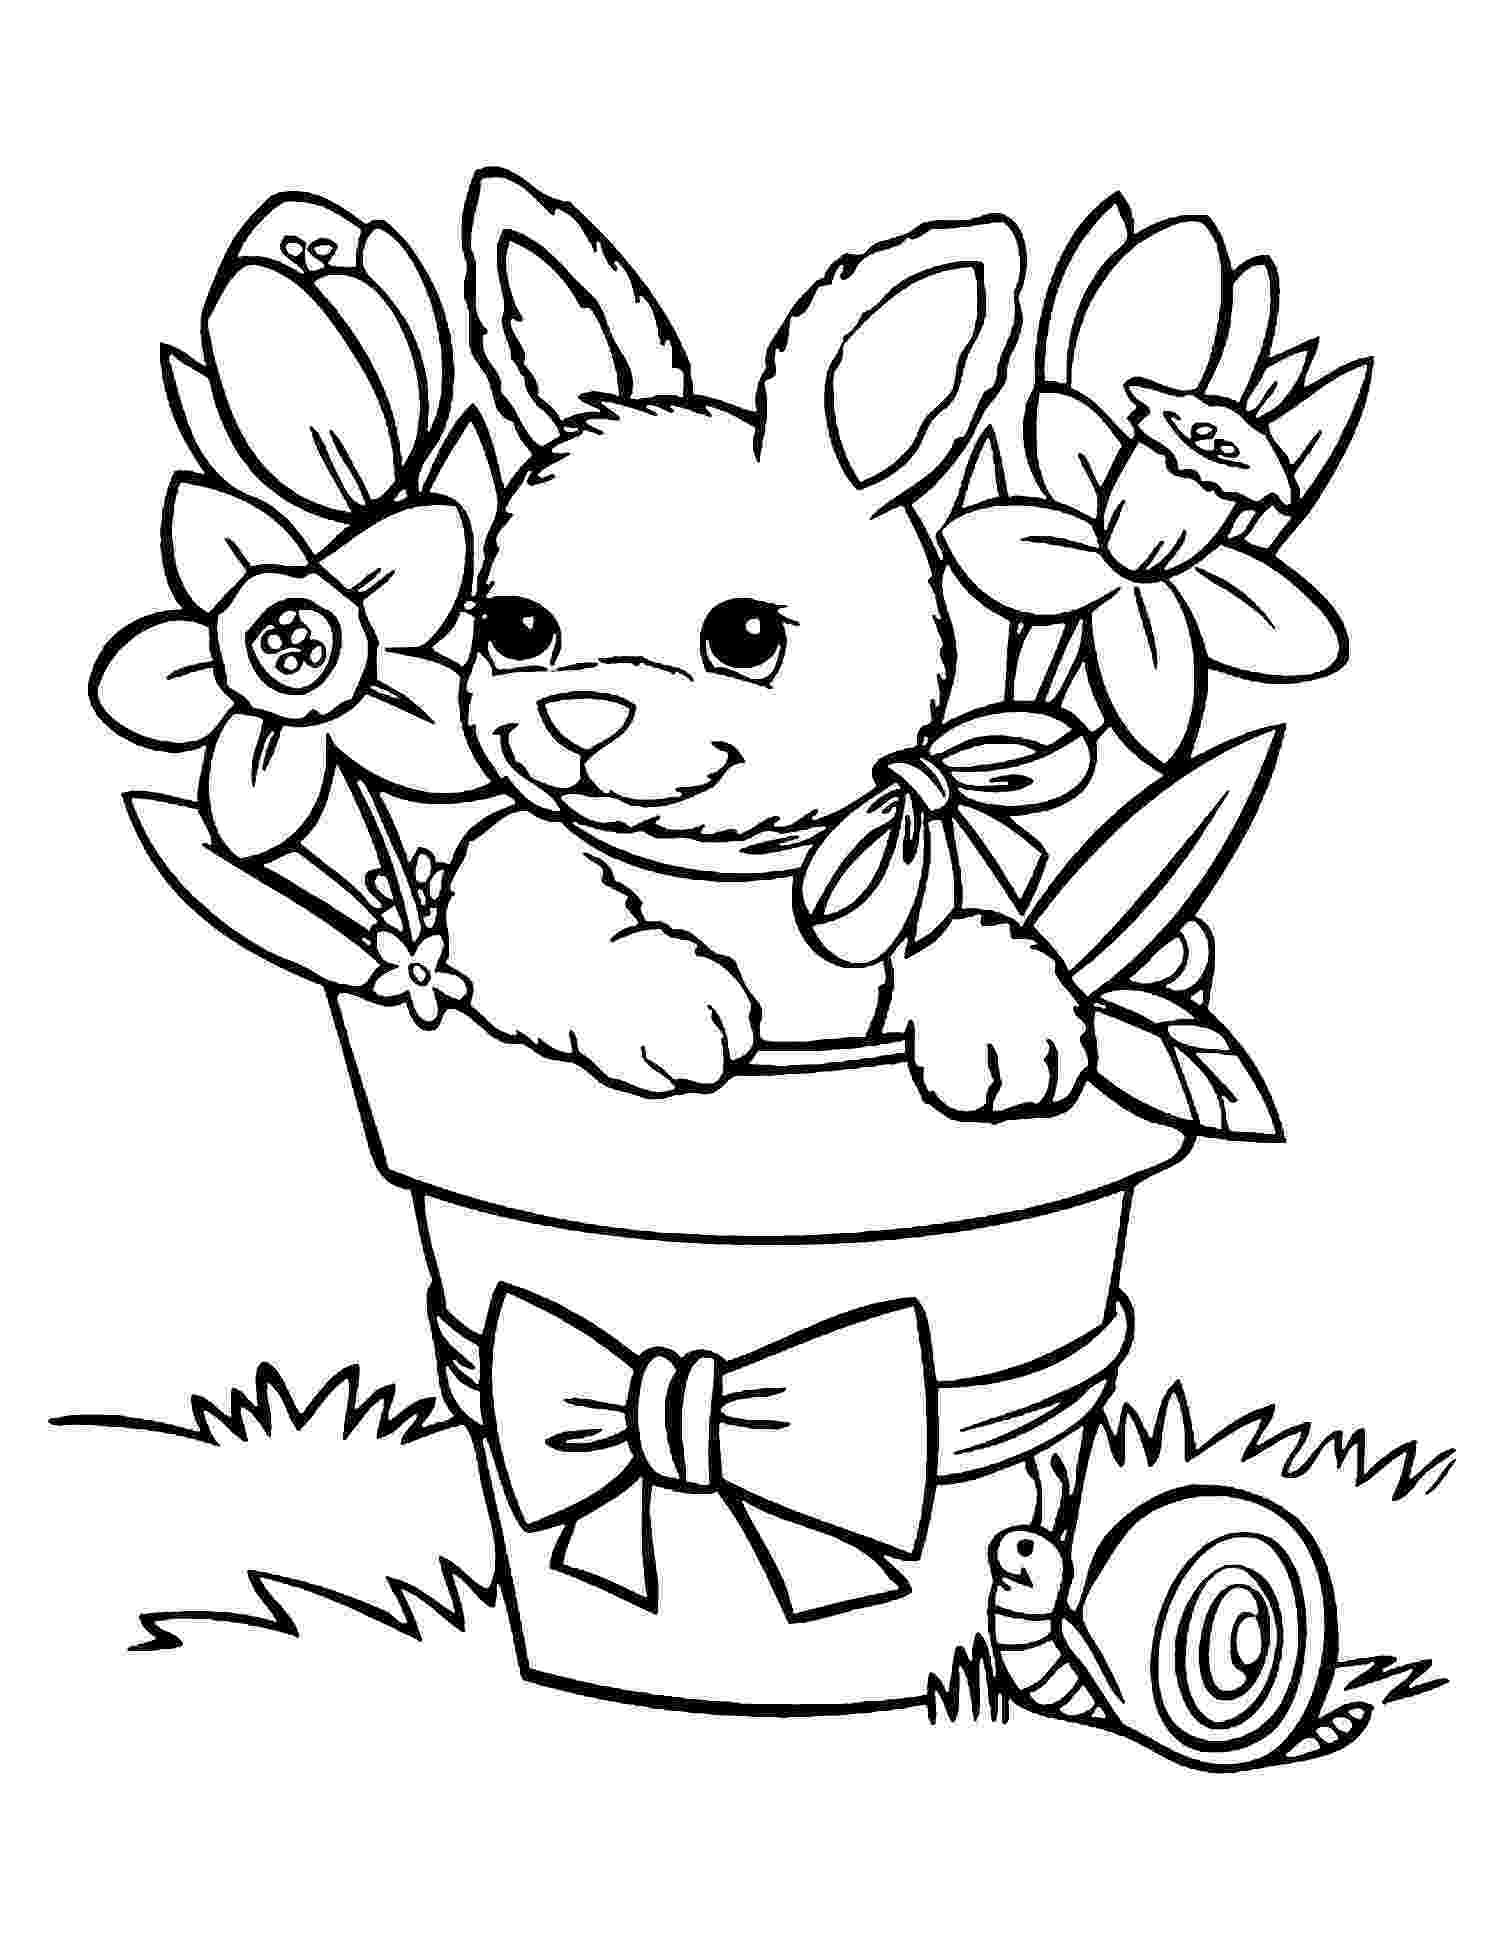 bunny coloring picture rabbit to download for free rabbit kids coloring pages picture coloring bunny 